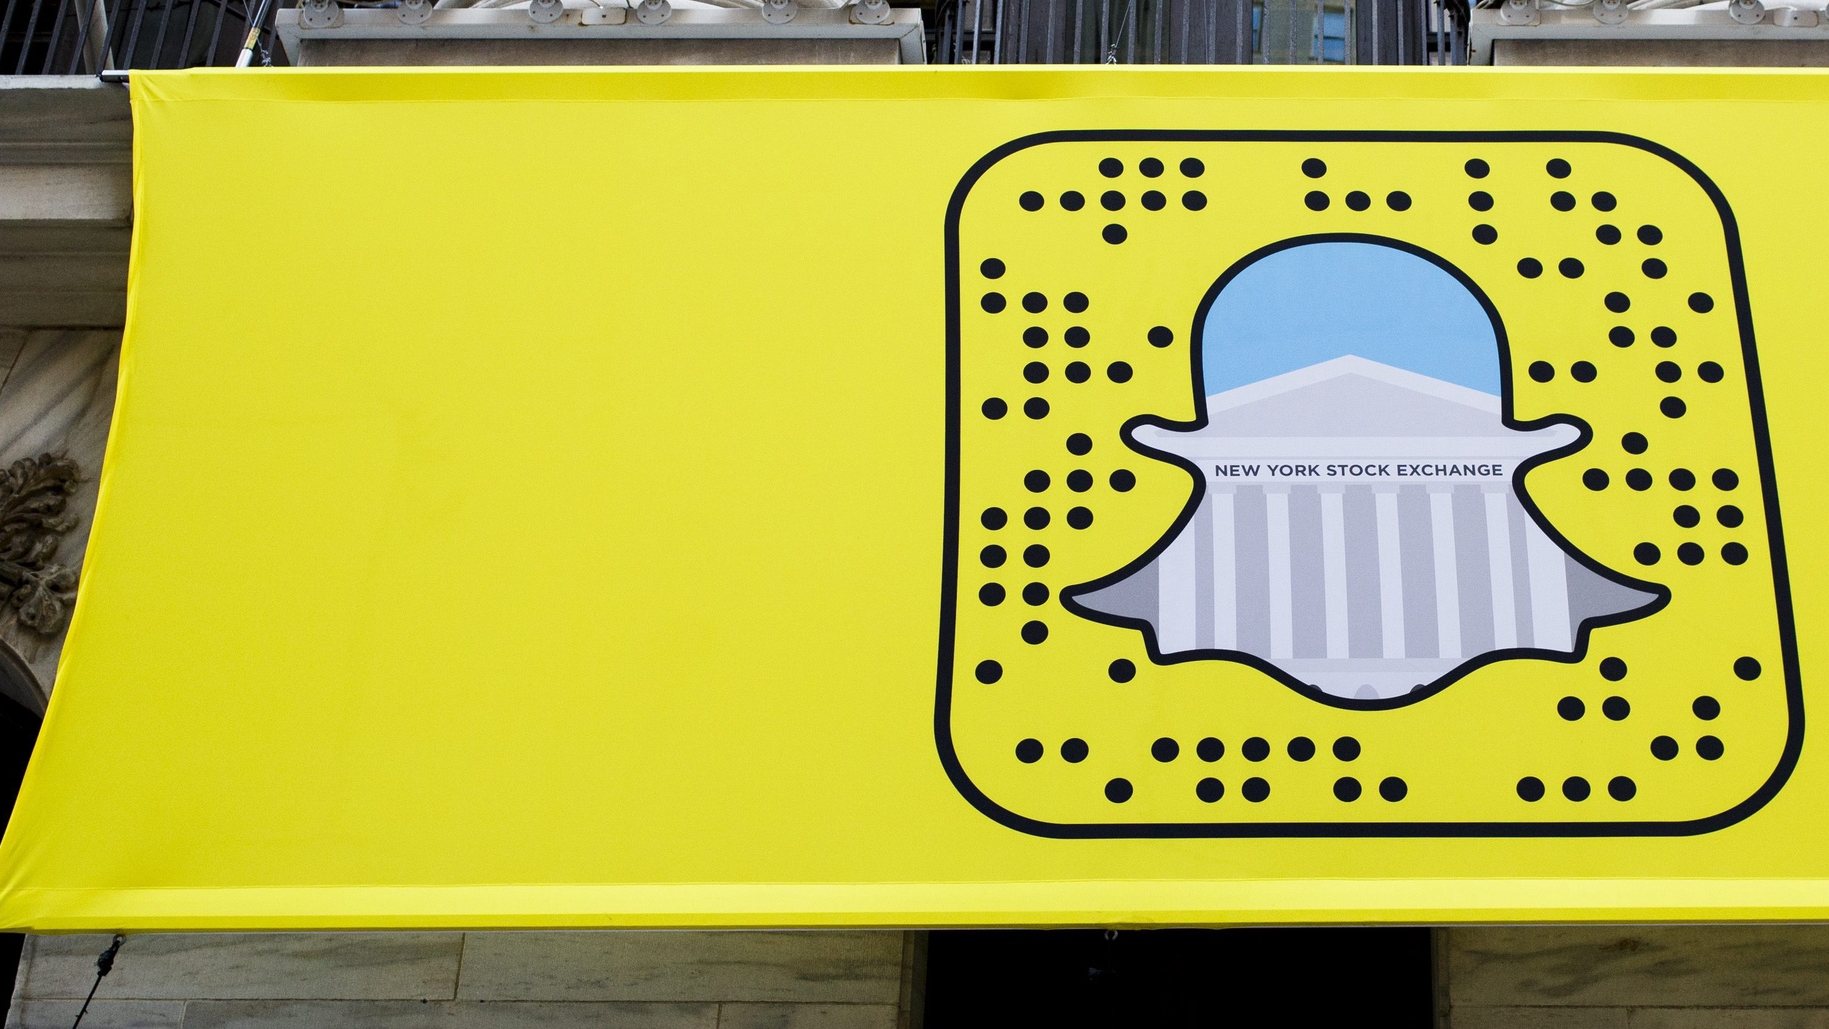 epa05635065 A logo for Snapchat hangs on the front of the New York Stock Exchange in New York, New York, USA, on 17 November 2016. Snap Inc., the parent company of Snapchat, has filed for an initial public offering which could come in March of 2017 and be valued at 20 - 25 billion US dollars (USD).  EPA/JUSTIN LANE